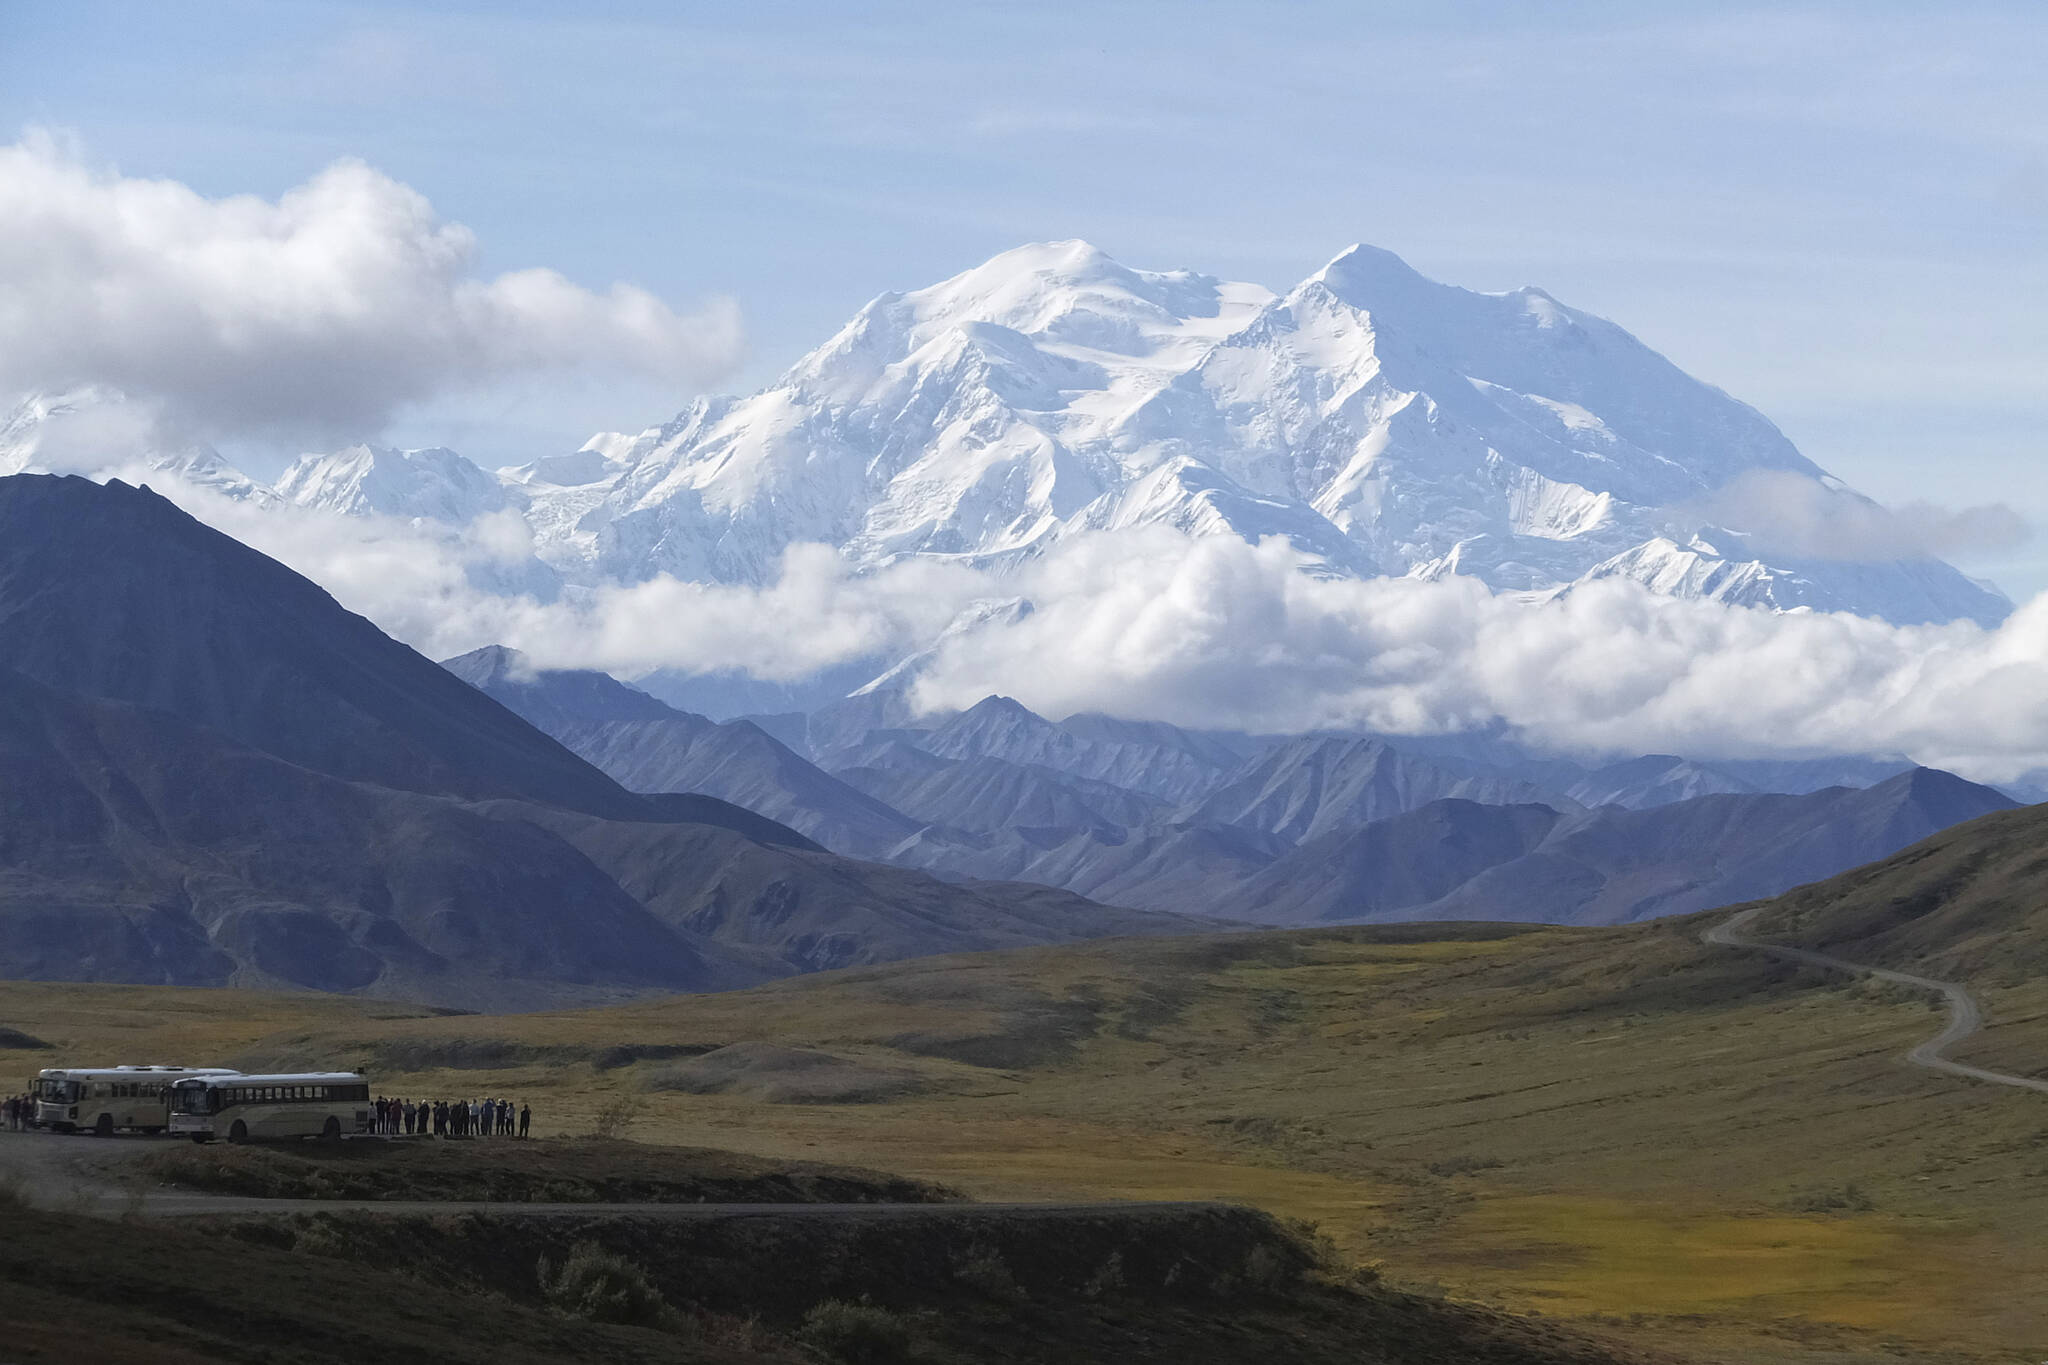 Sightseeing buses and tourists are seen at a pullout popular for taking in views of North America’s tallest peak, Denali, in Denali National Park and Preserve, Alaska, on Aug. 26, 2016. A Utah doctor is accused of lying to get a high-elevation helicopter to rescue him off the tallest mountain in North America and then destroying evidence. Dr. Jason Lance, who is a radiologist in Ogden, Utah, faces three misdemeanors, interfering with and violating the order of a government employee and for filing a false report from his May 2021, attempt to summit Denali, located about 180 miles north of Anchorage. (AP Photo / Becky Bohrer)